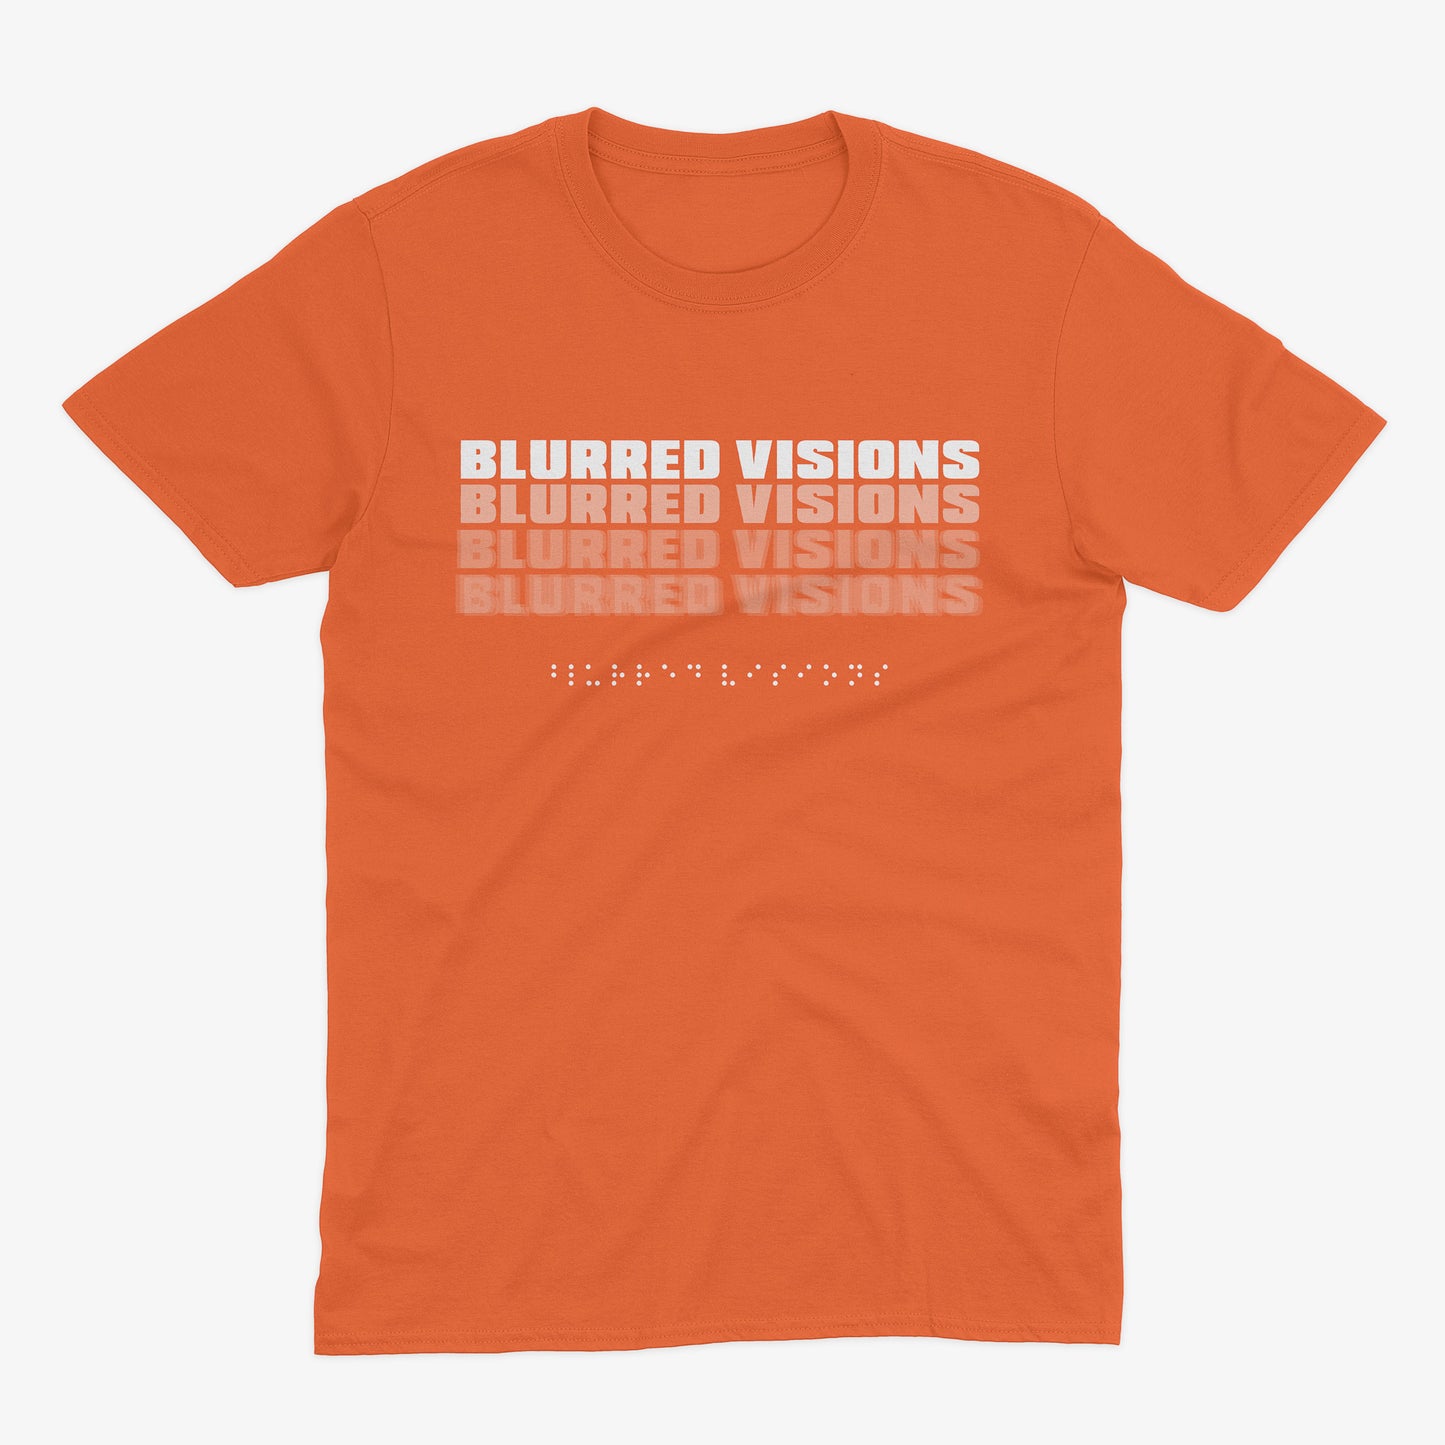 Blurred Visions - Limited Edition - Orange Tee